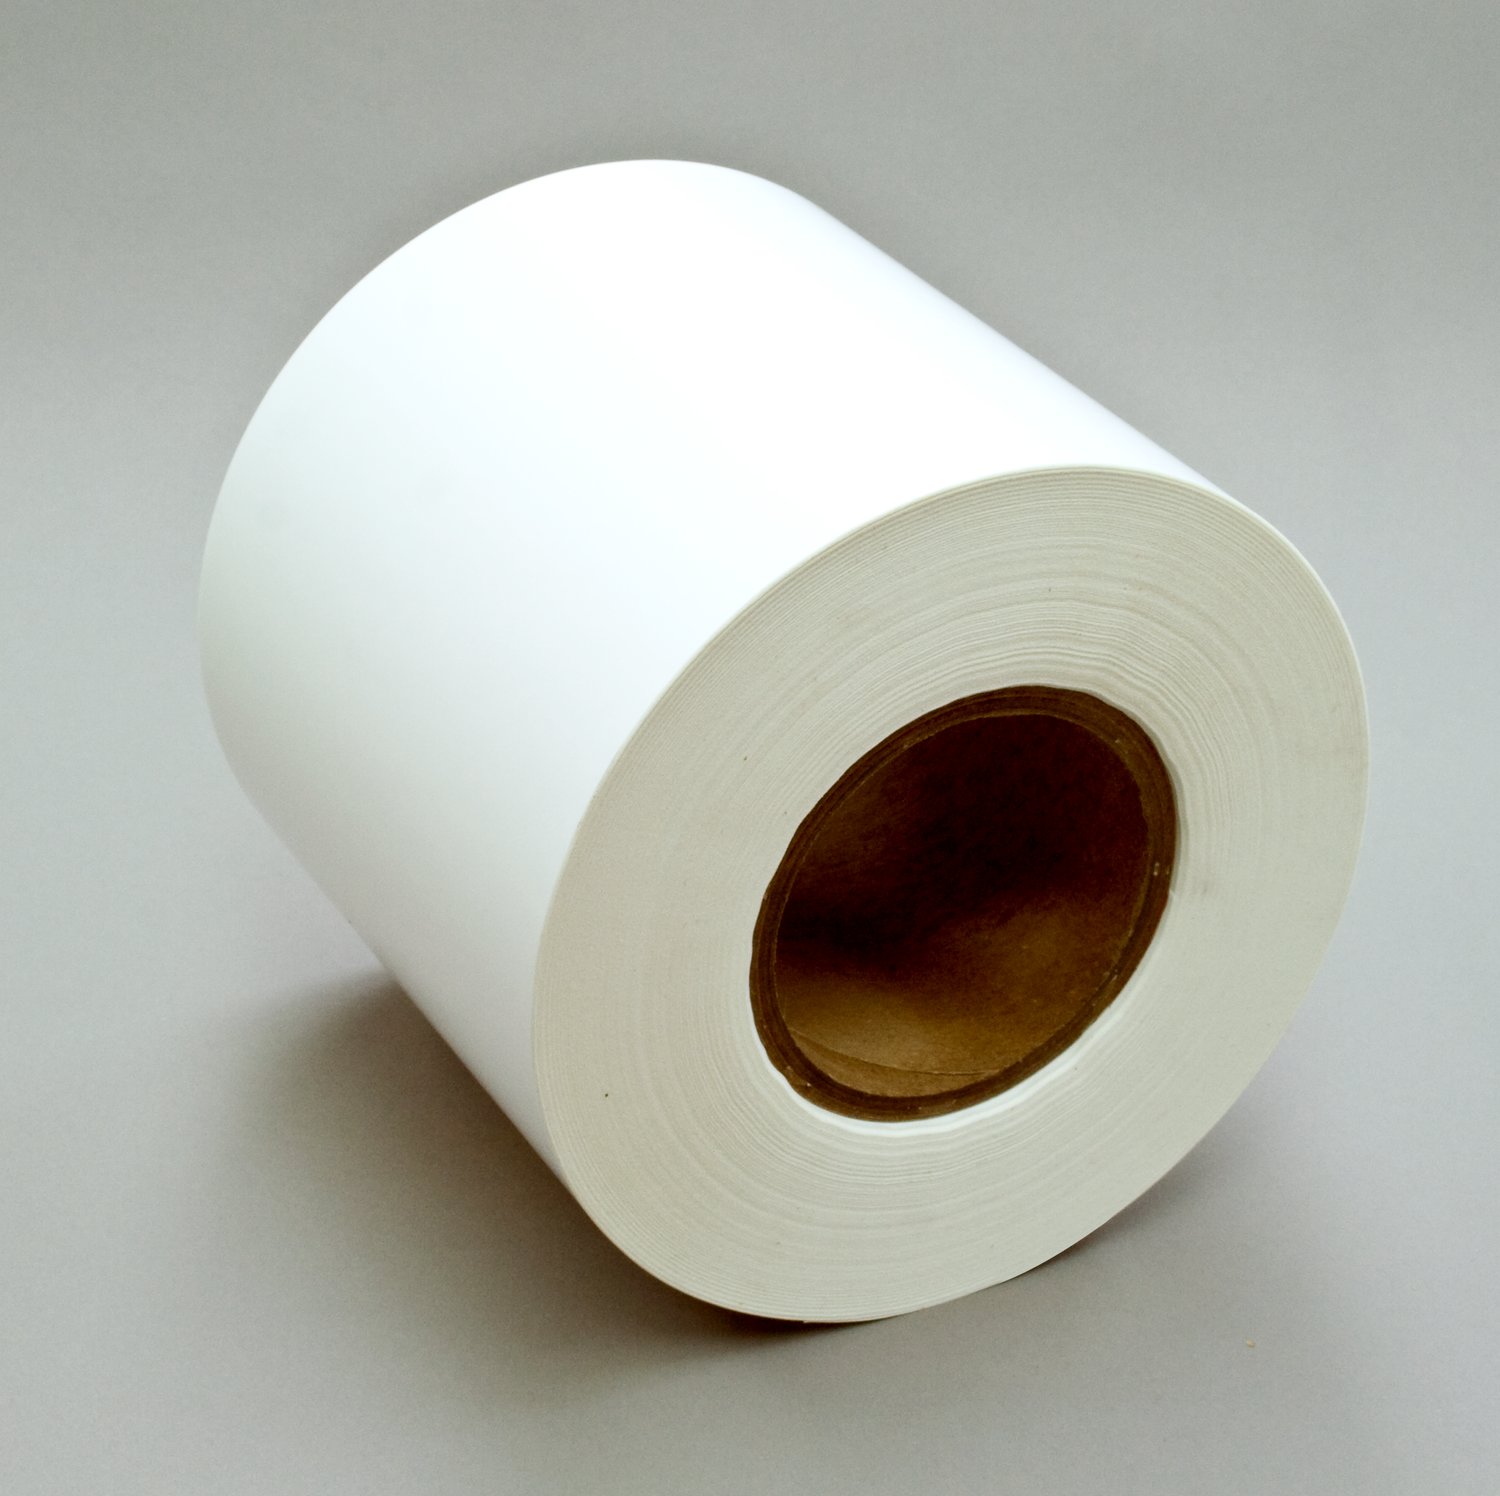 7100020797 - 3M Thermal Transfer Label Material 7815, White Polyester Matte, 4.5 in
x 1668 ft, 1 Roll/Case